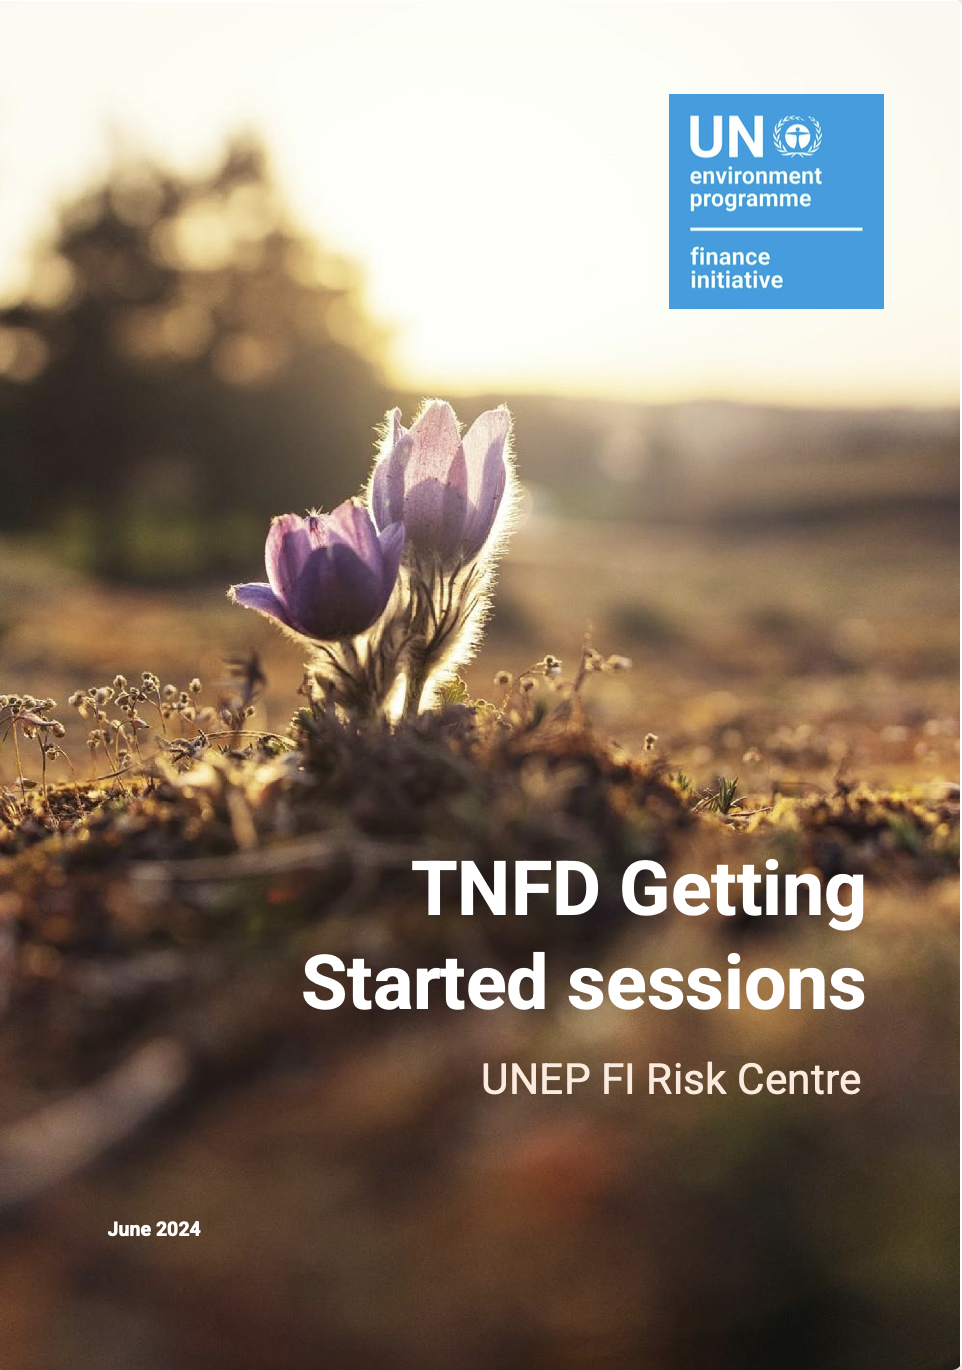 TNFD Getting Started sessions